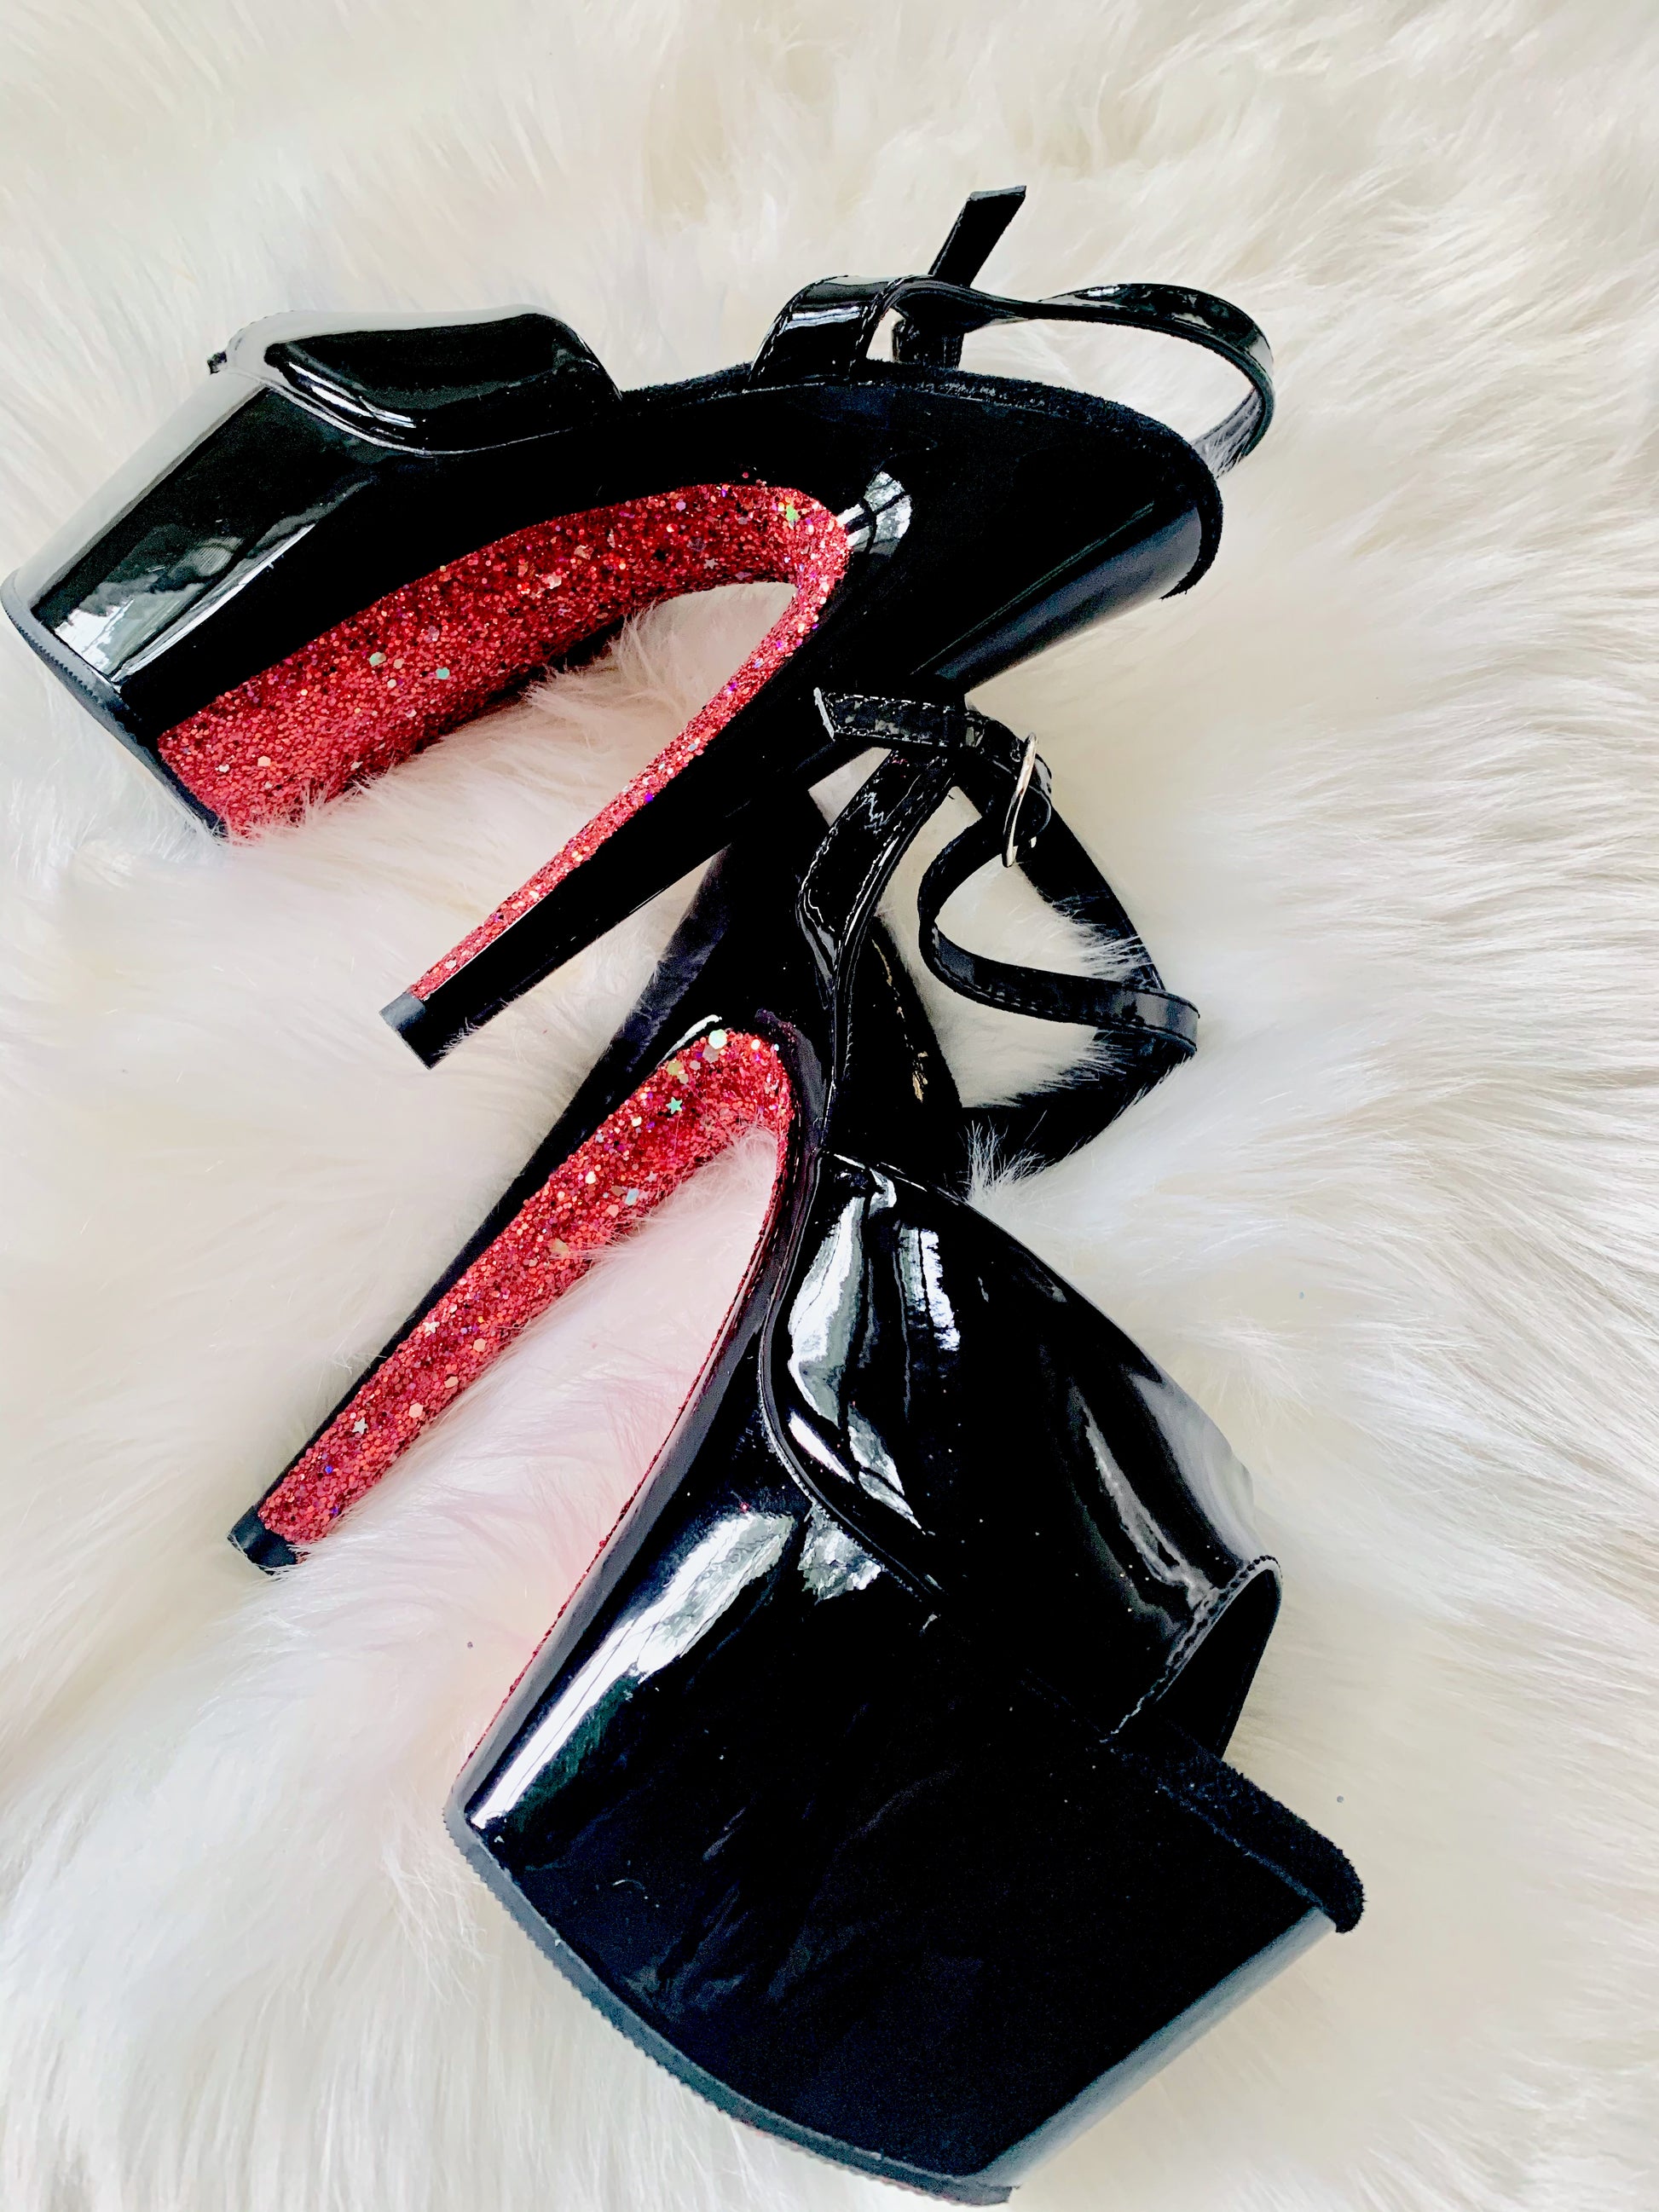 Black patent platform heels with black straps. Red glitter on the arches and inside of heels. Black soles.